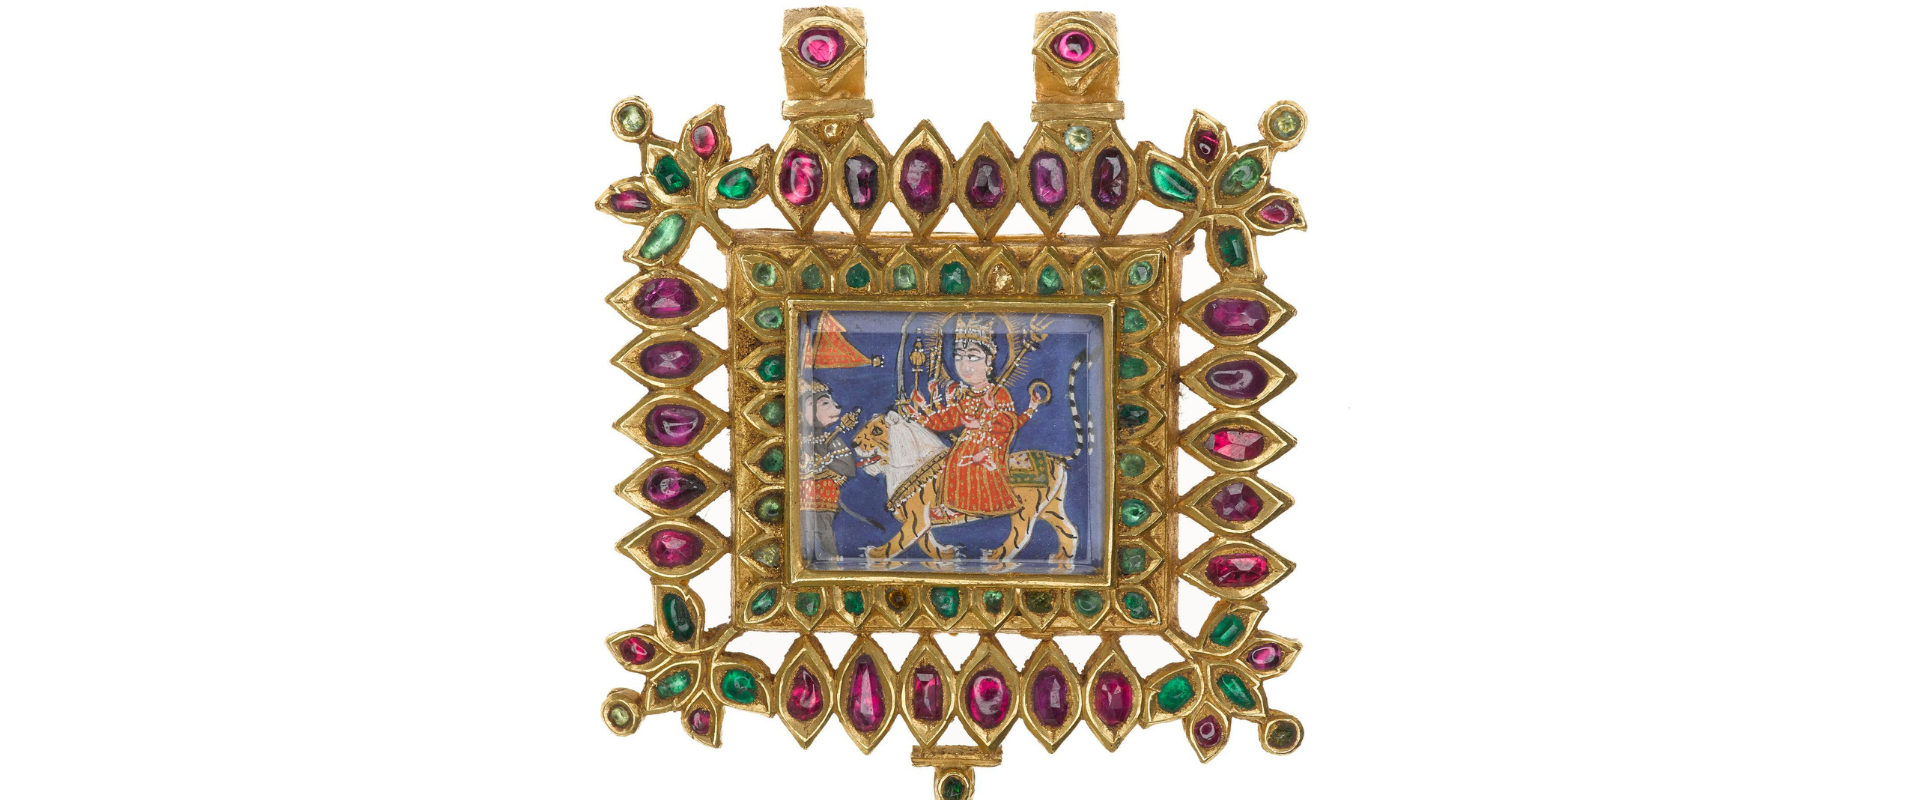 endant of gold inlaid with rubies and emeralds, beneath the central rock crystal a depiction of the Hindu goddess Durga, preceded by Hanuman.